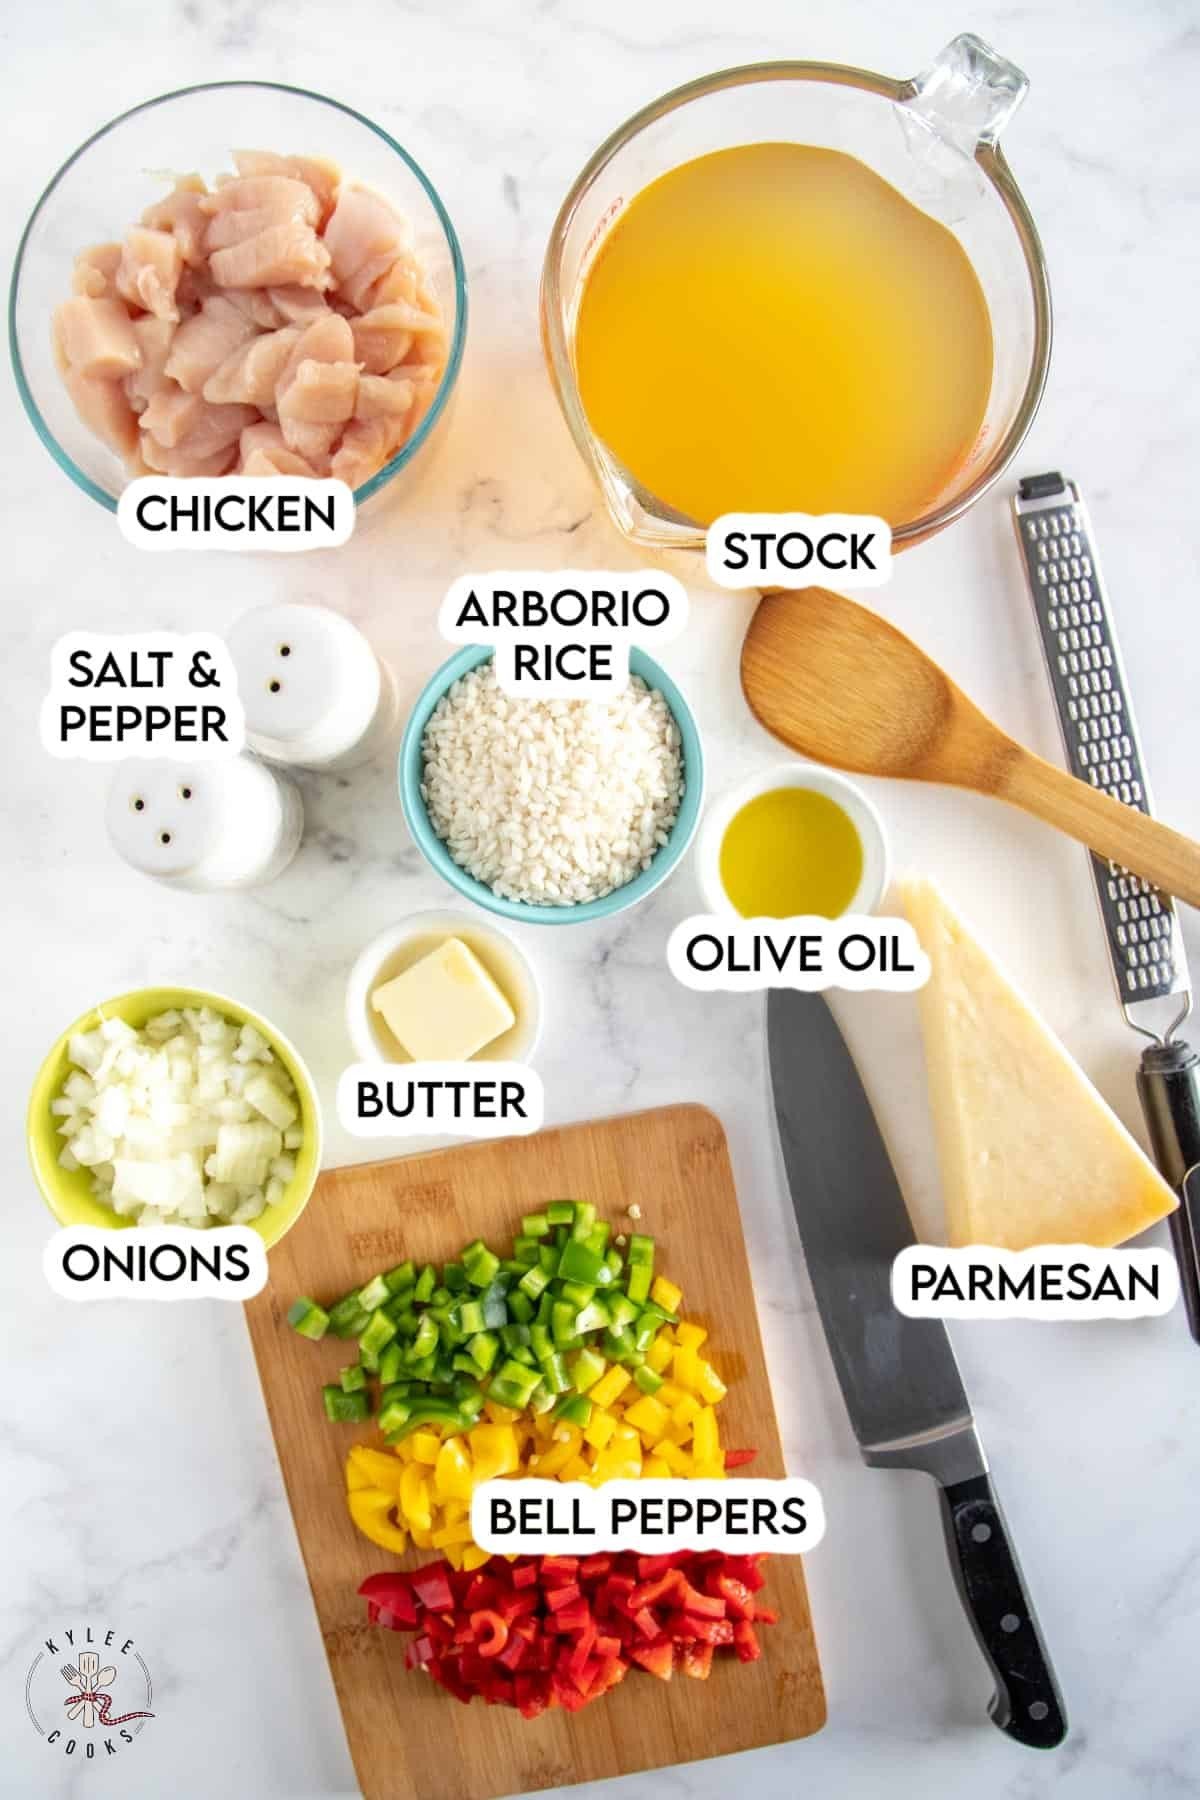 ingredients to make chicken risotto laid out and labeled.